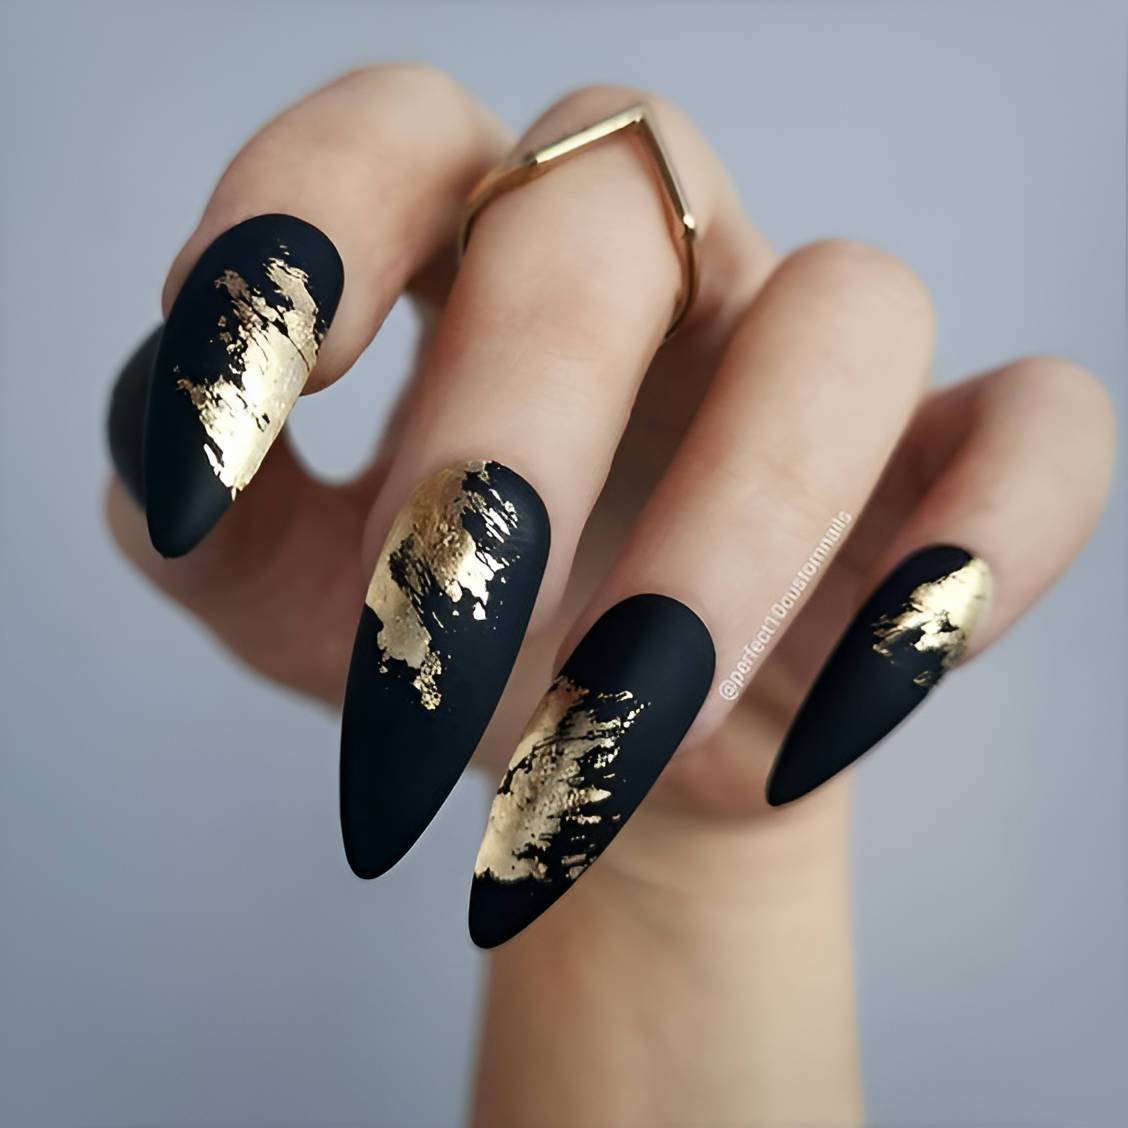 30 Classy Black Nail Designs To Glam You Up - 207